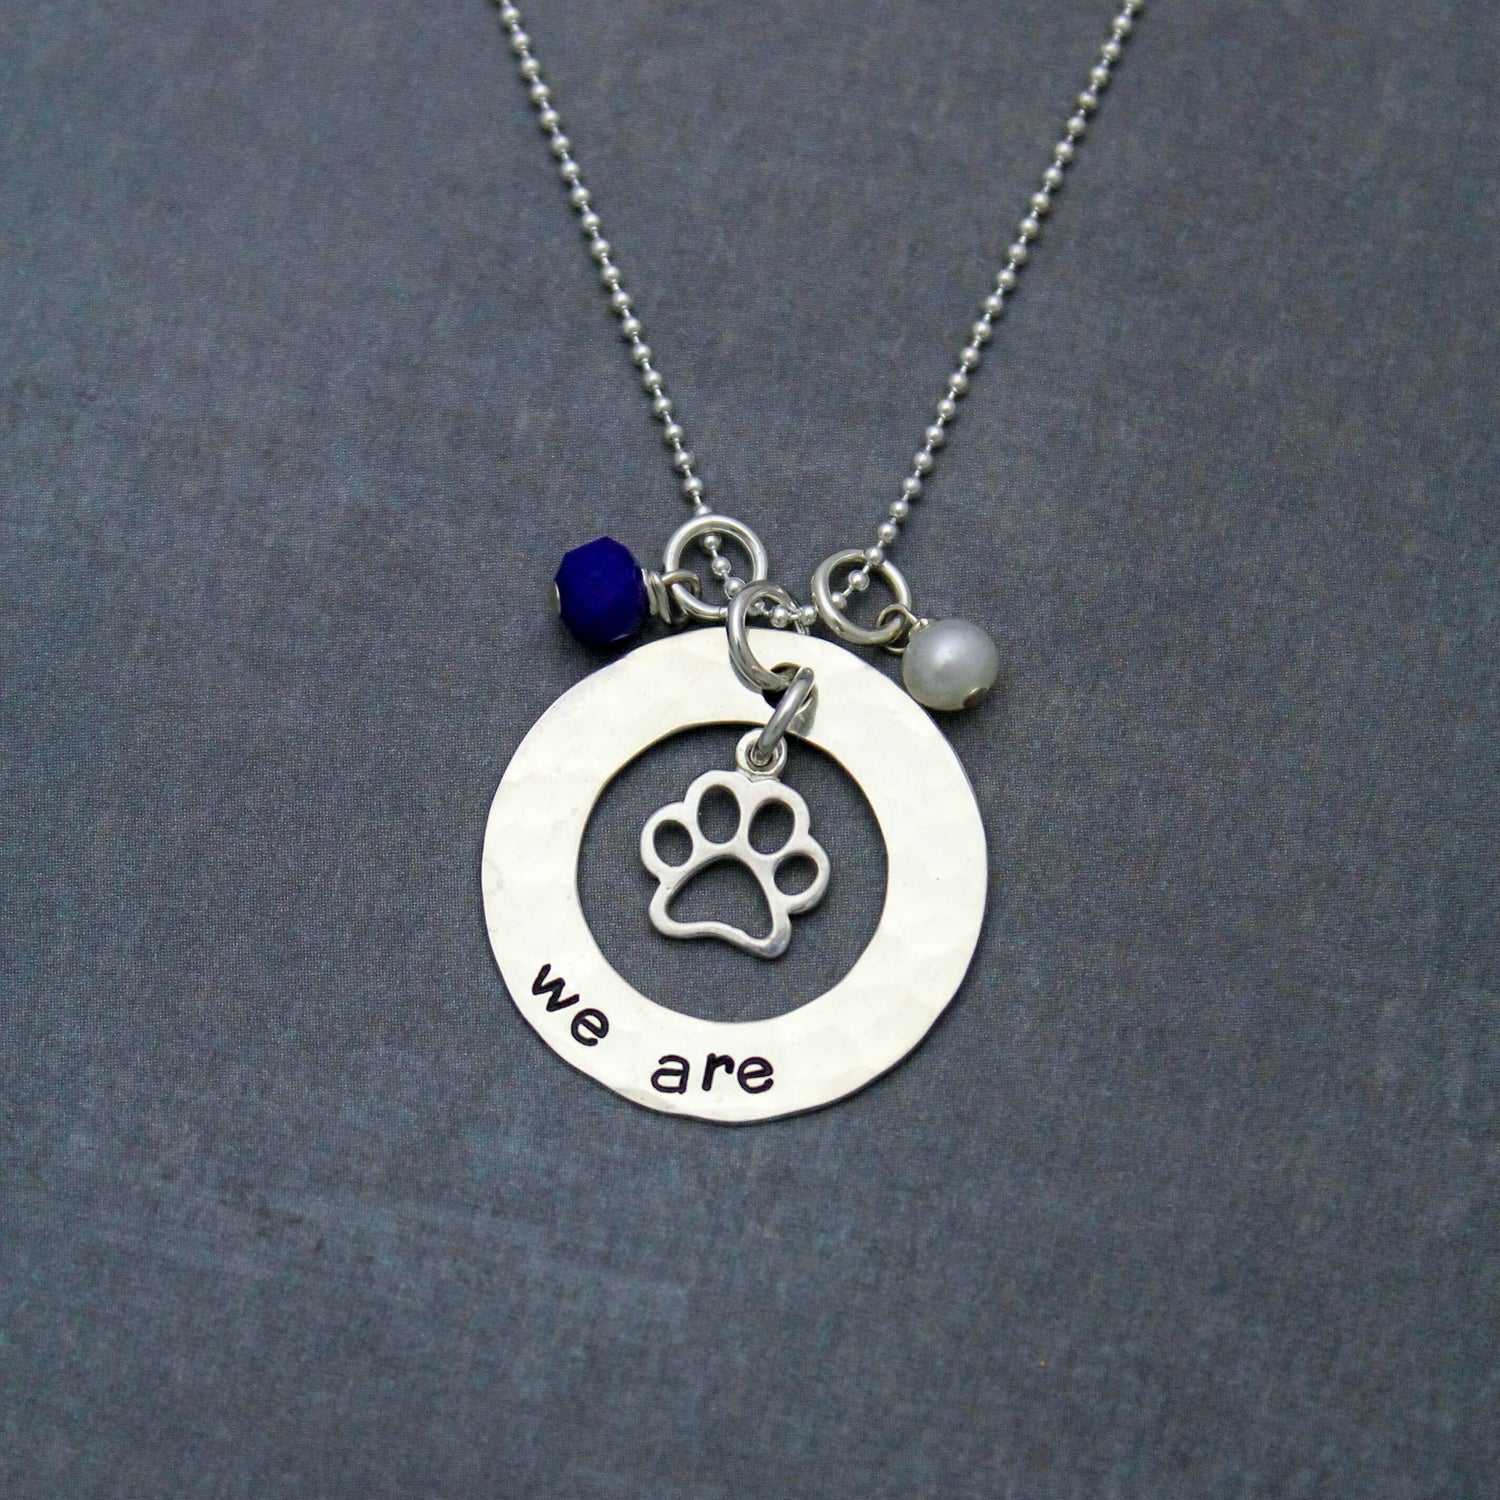 We Are Necklace, Penn State Necklace, Nittany Lions Gift, PSU Grad Gift, Graduation Gift for Penn State, Hand Stamped Jewelry, Silver Washer